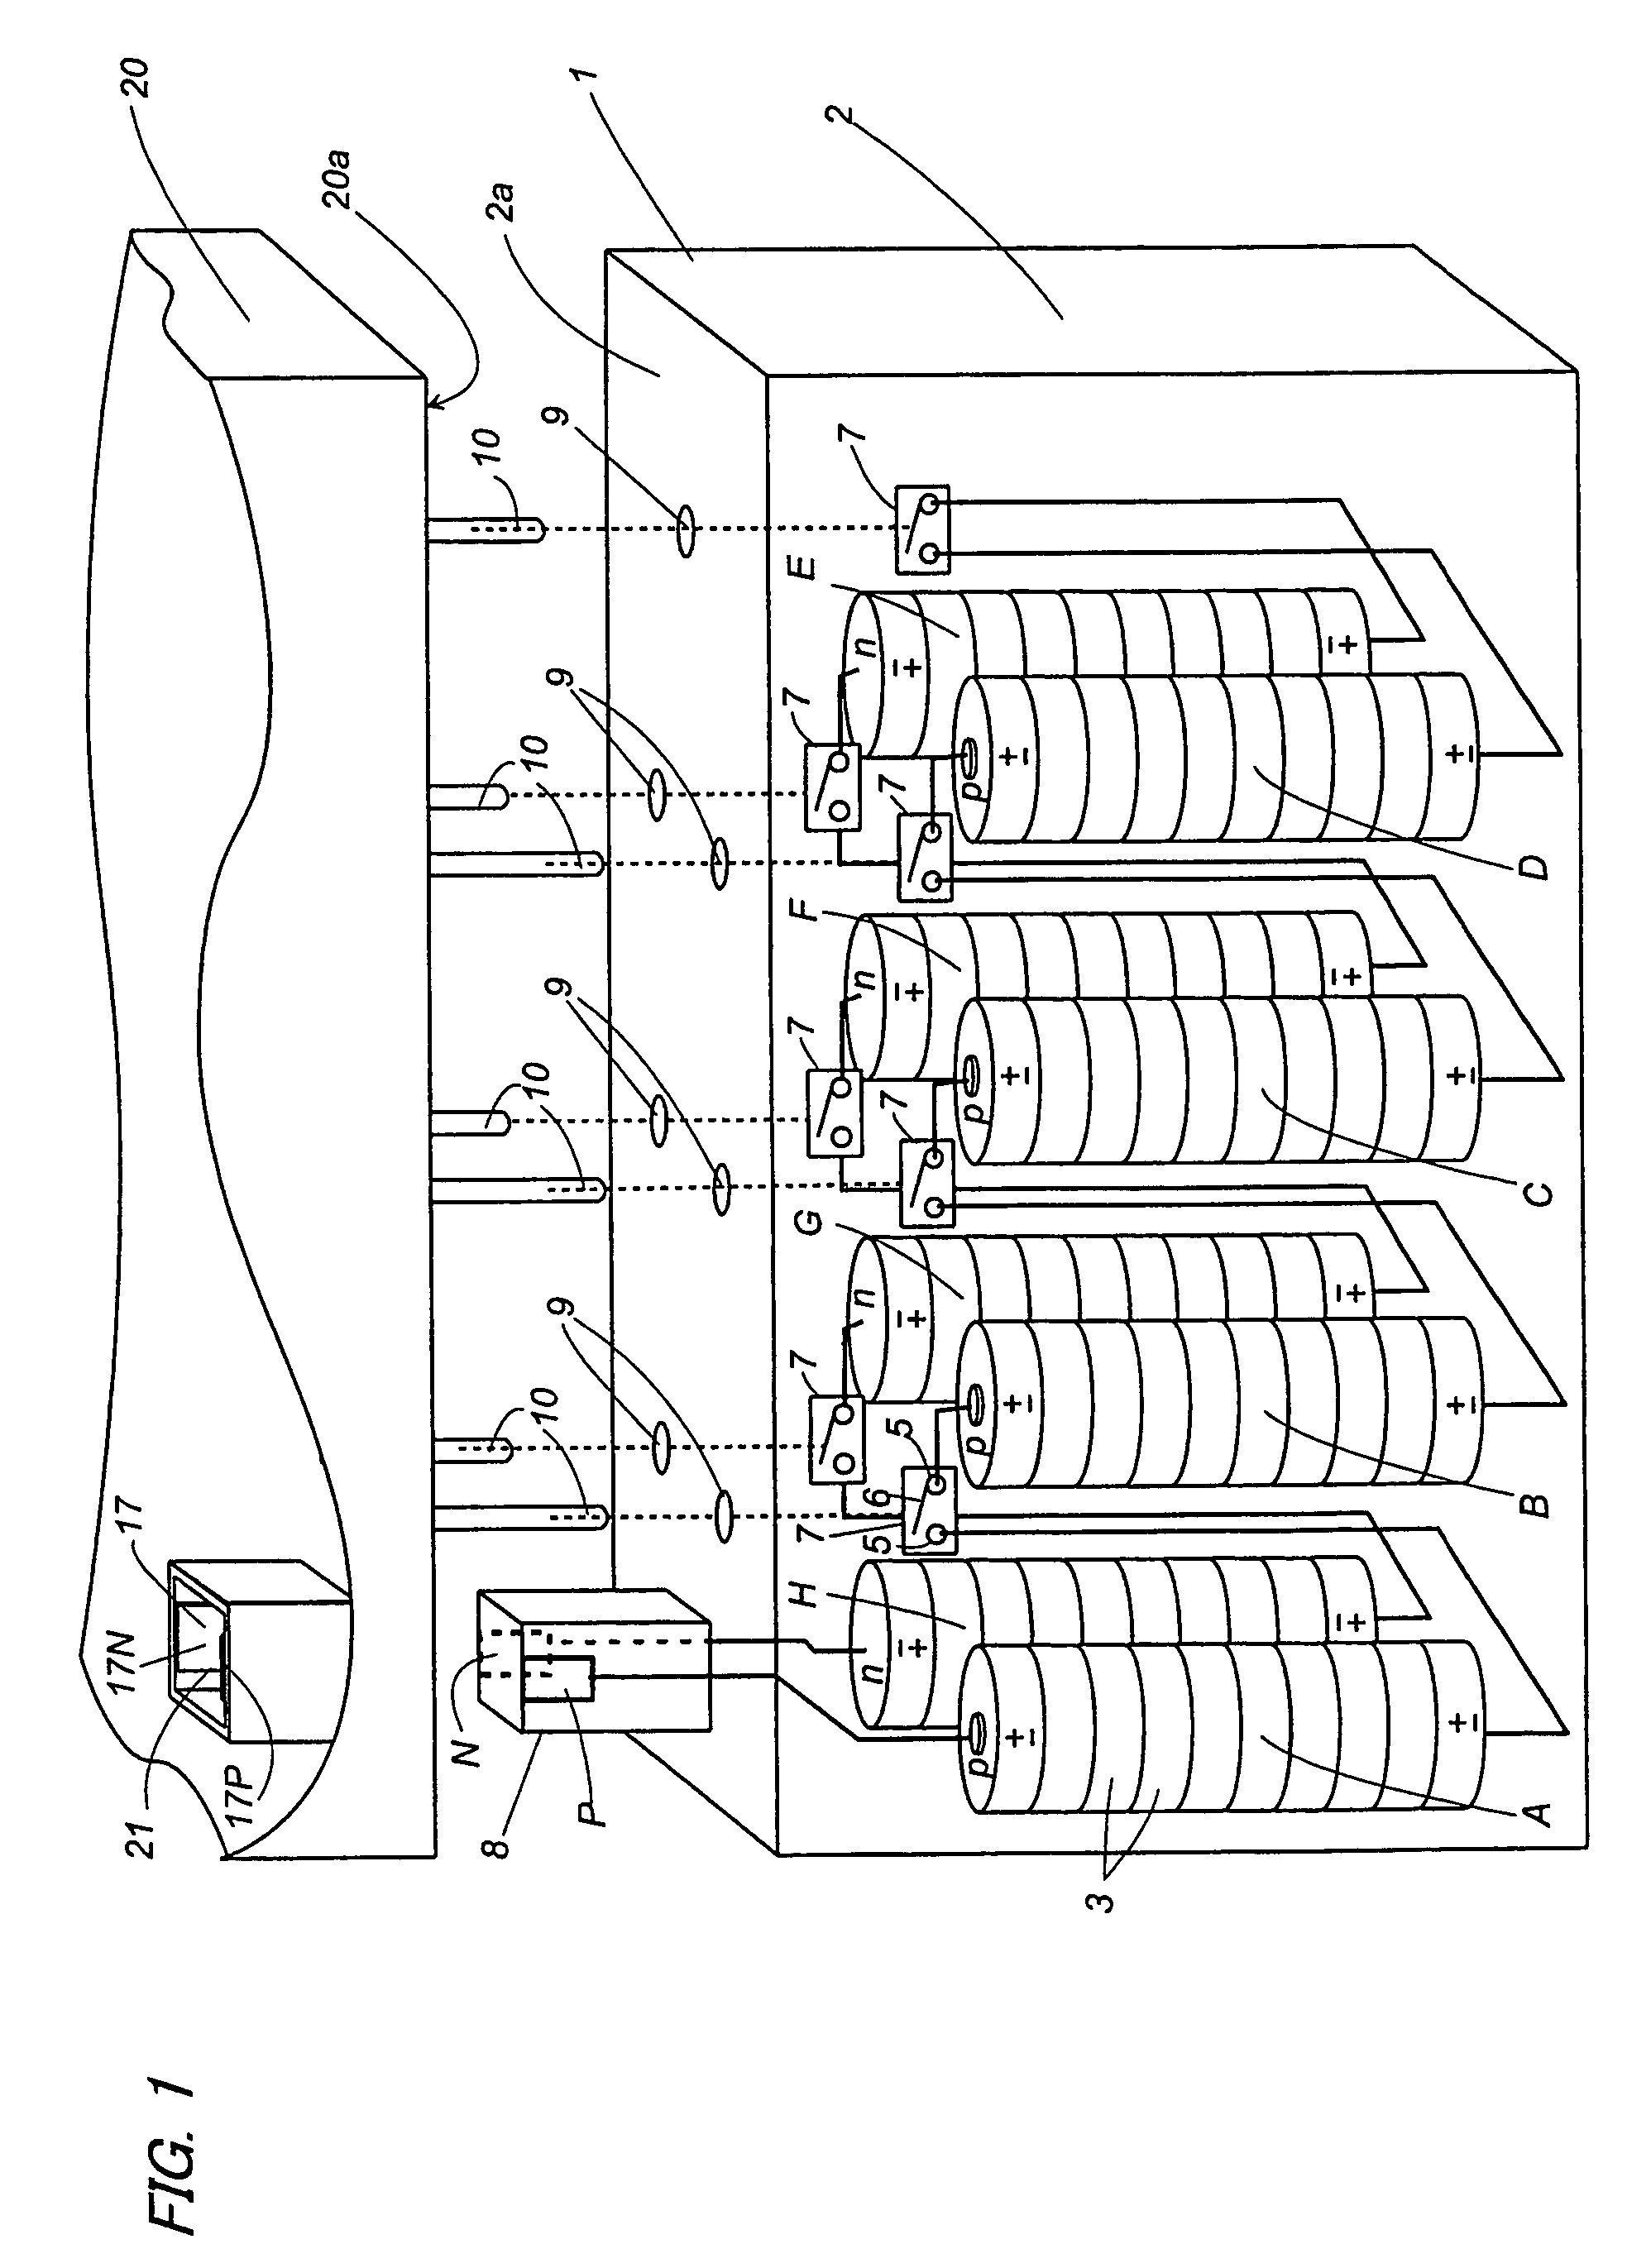 Battery-powered electrical device having a detachable battery pack